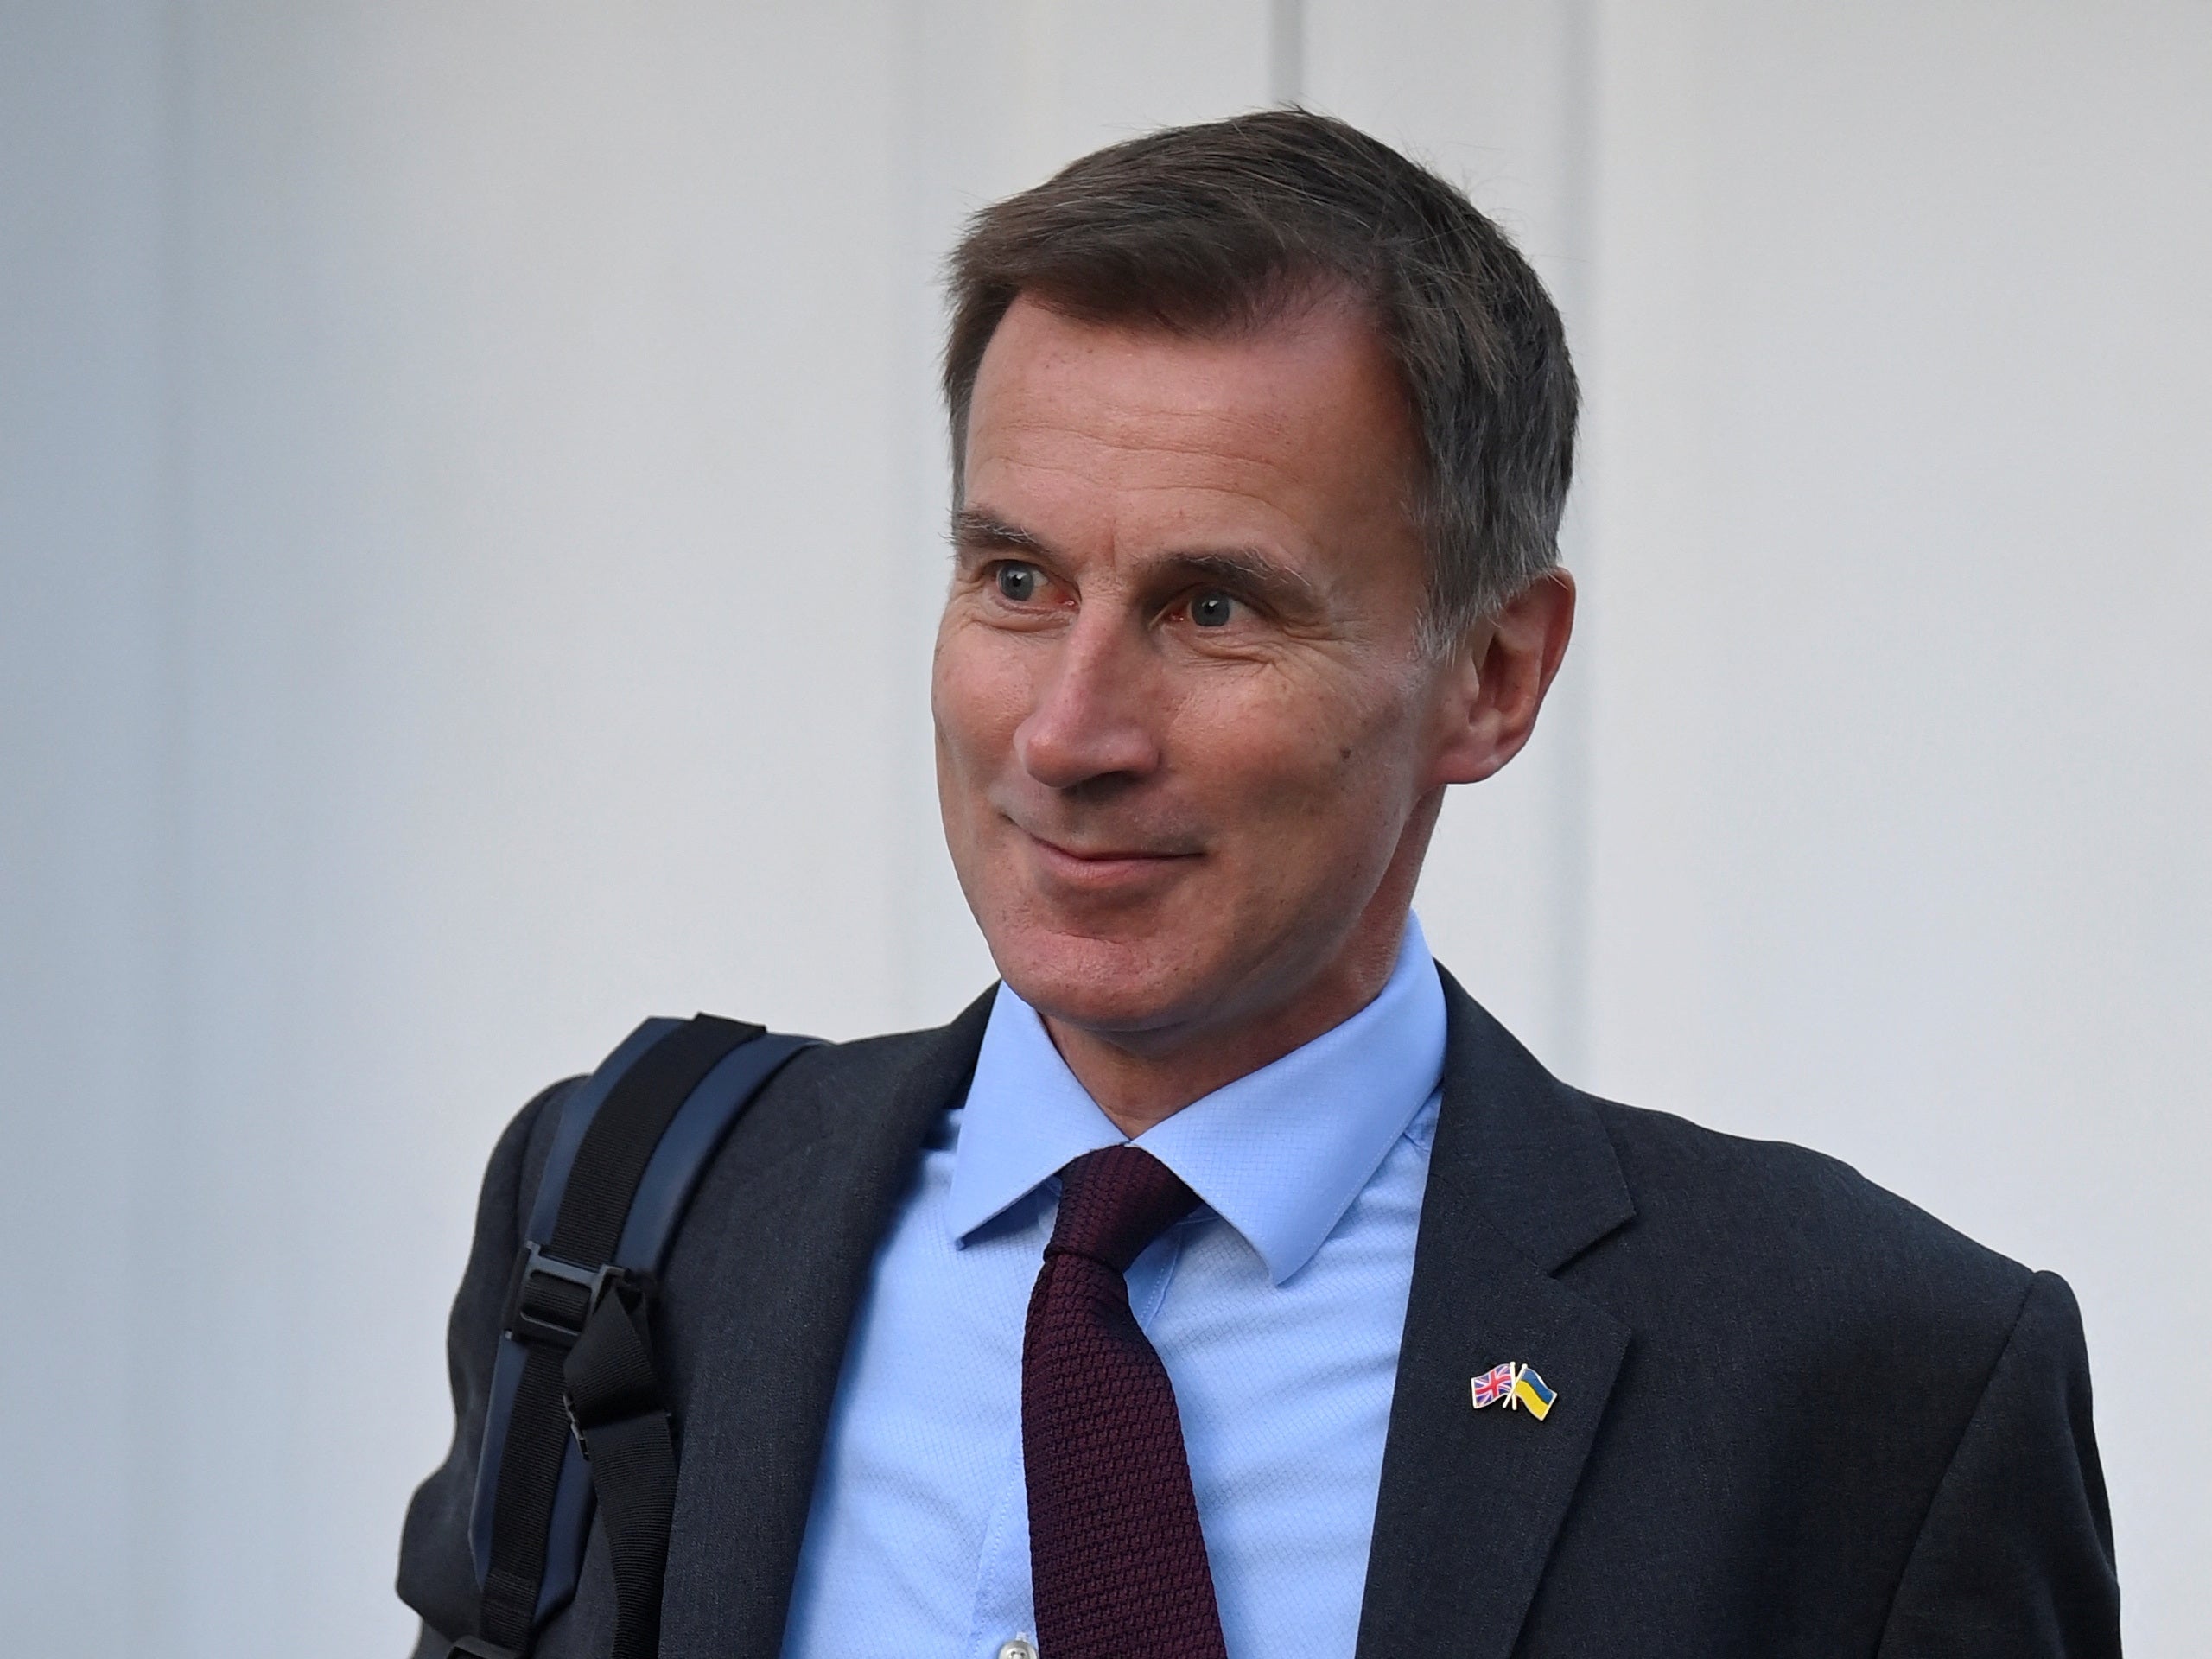 We have only got the tax side of Jeremy Hunt’s plans, not the spending side